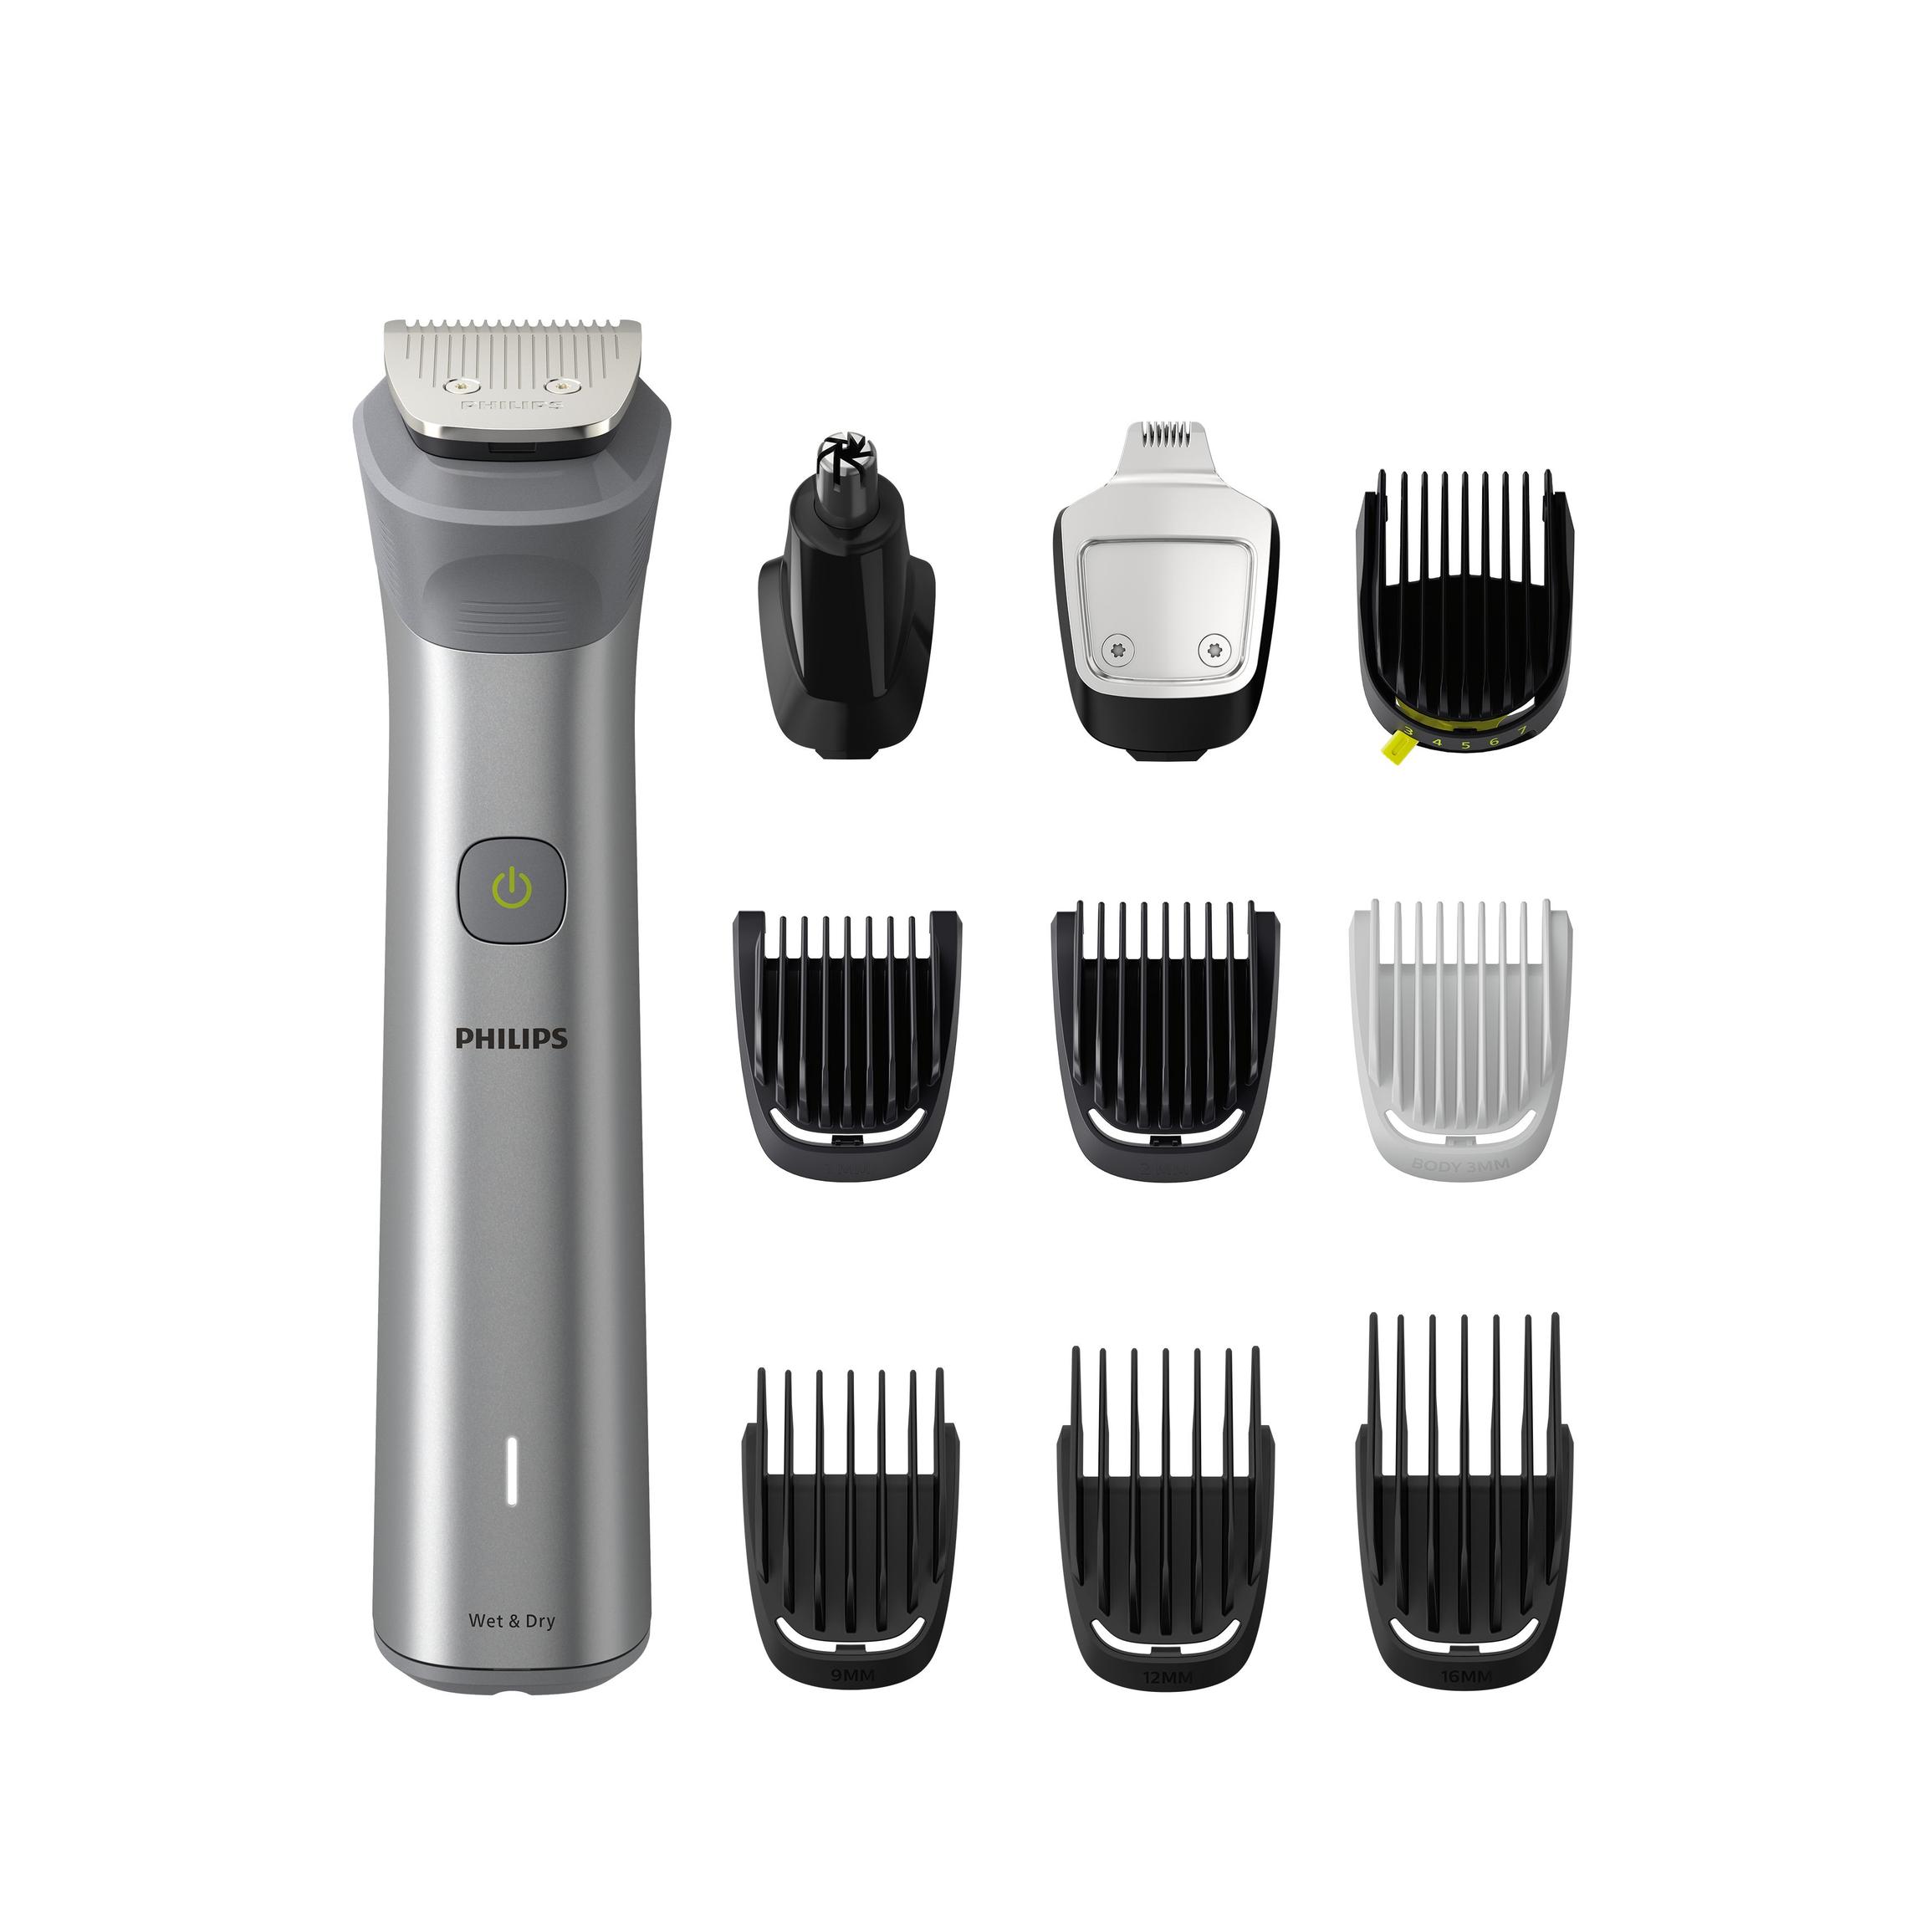 Offerta per Philips - All-in-One Trimmer MG5920/15 Serie 5000 a 54,95€ in Trony